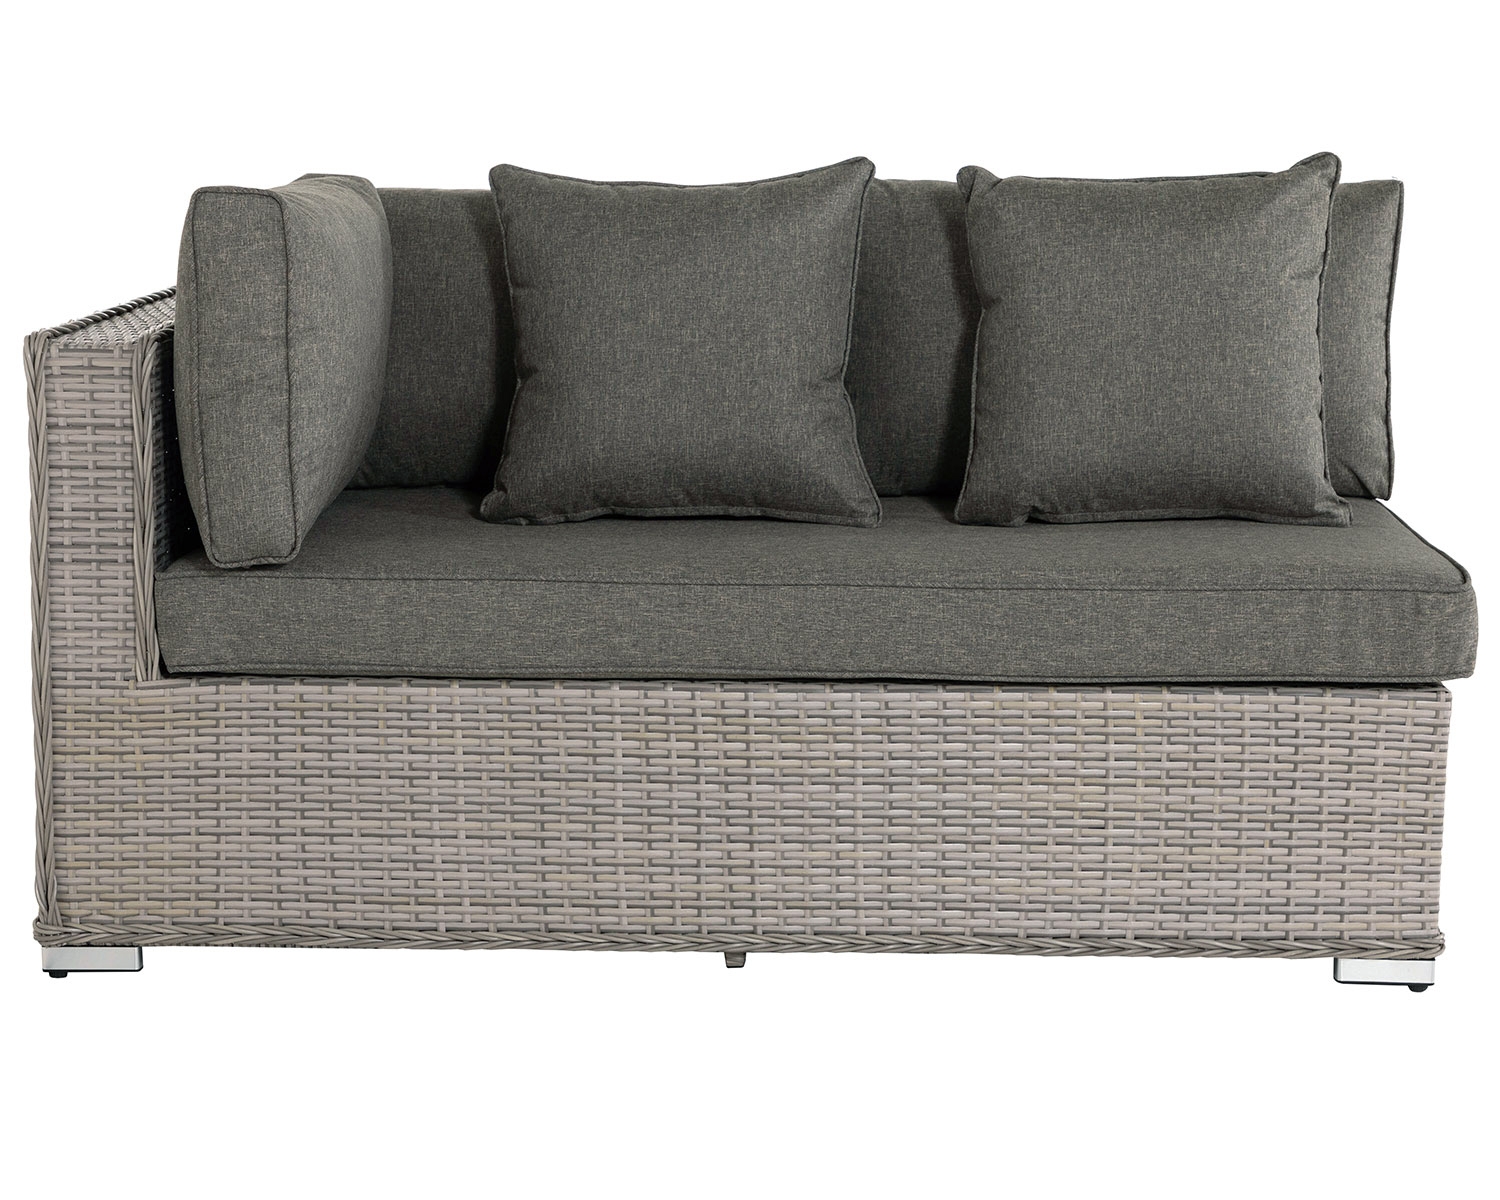 Rattan Garden Day Bed Sofa Right As You Sit In Grey Monaco Rattan Direct